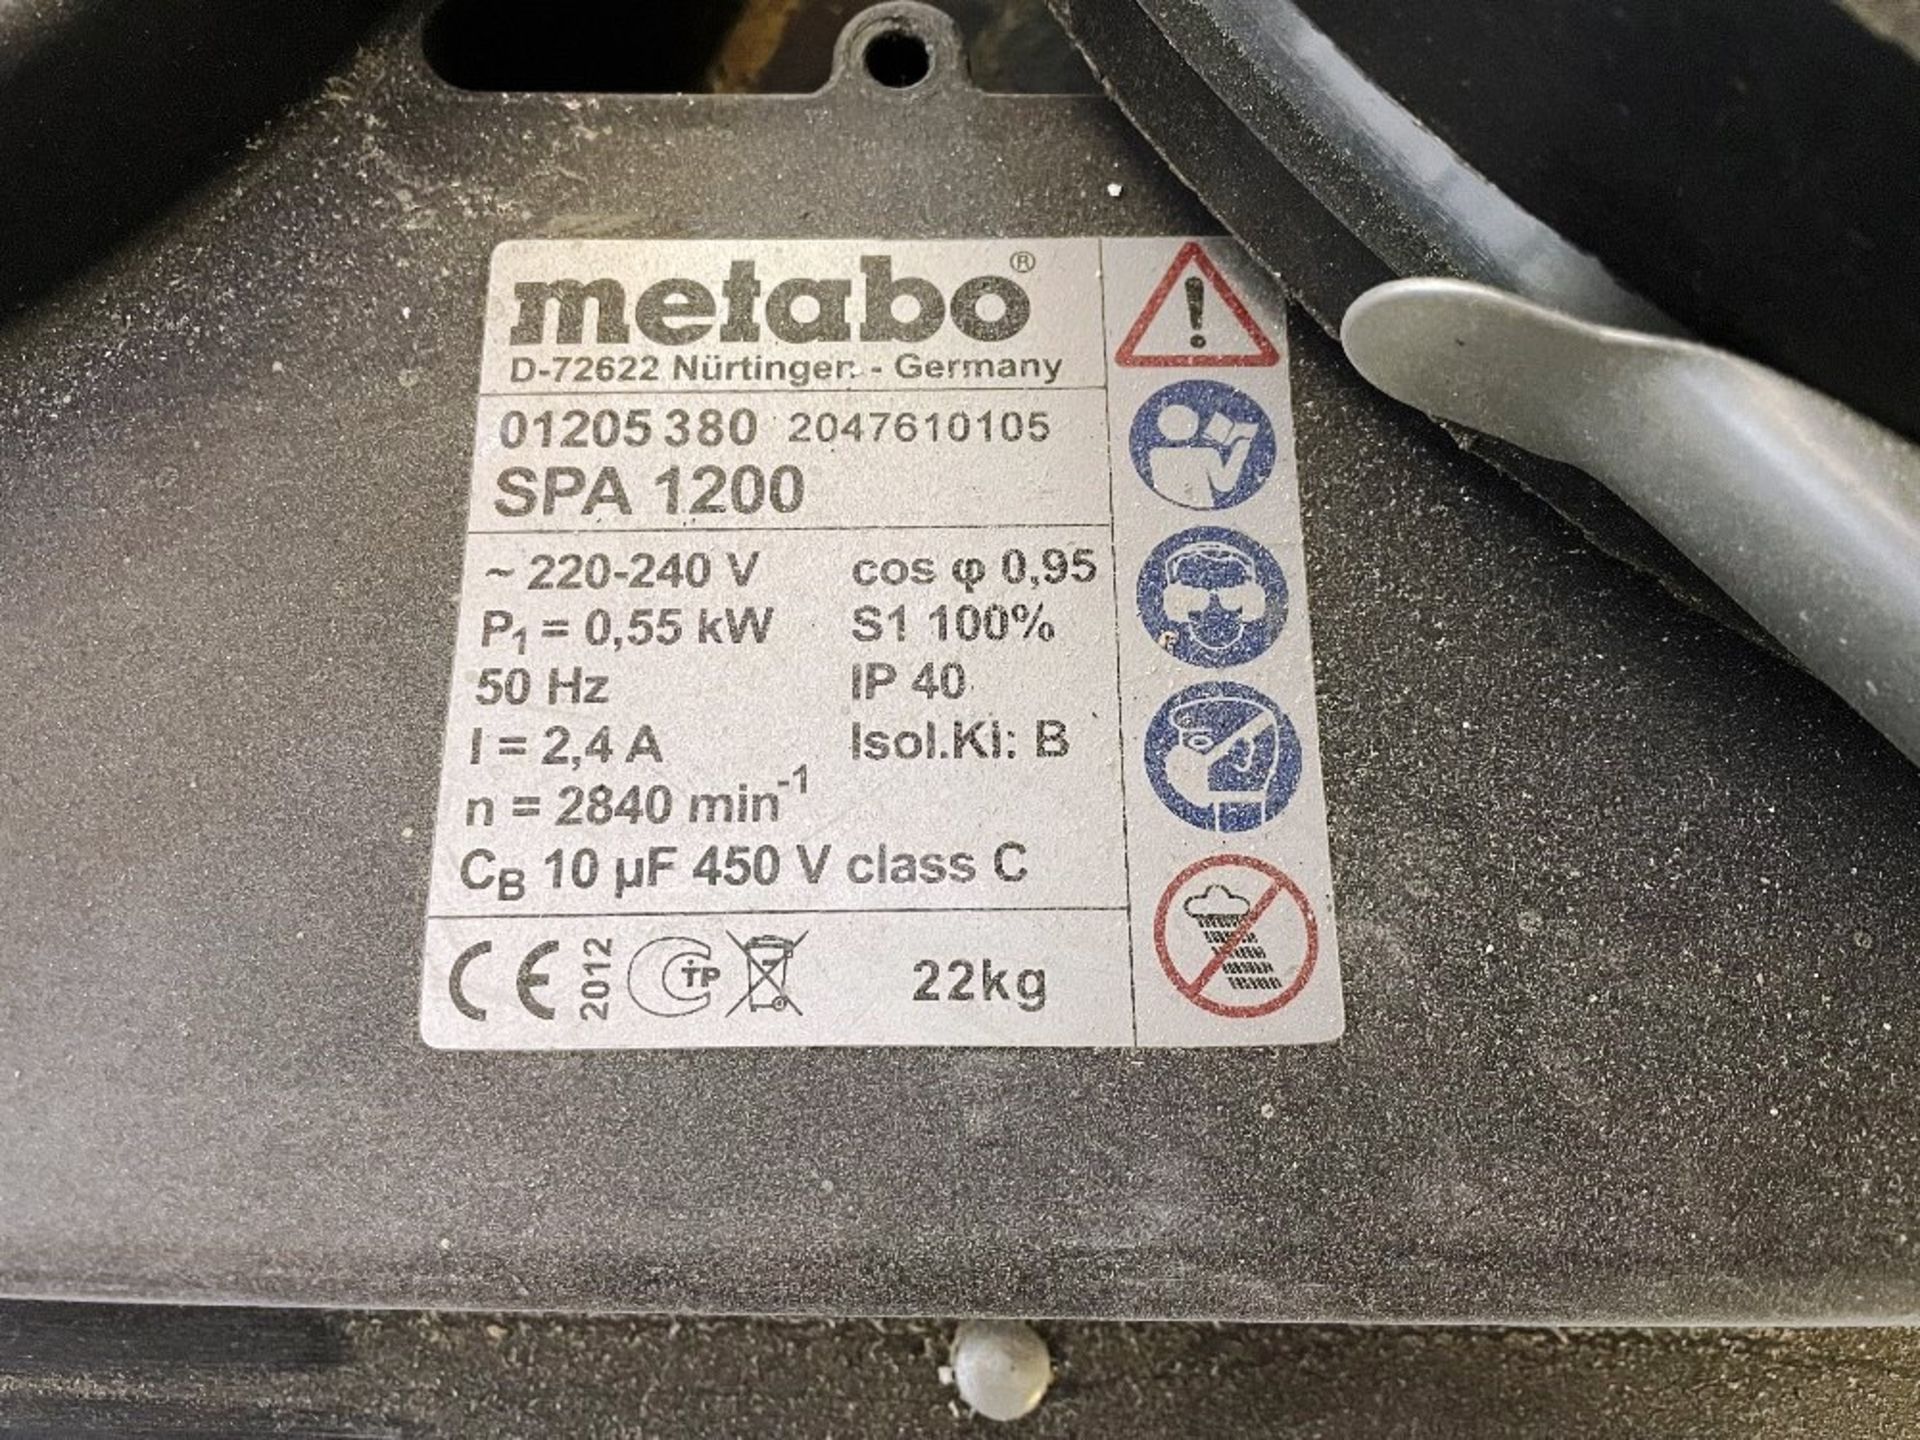 Unosand Multi 280 Denibbing Sander w/ Metabo SPA 1200 Dust Extractor - Image 9 of 10